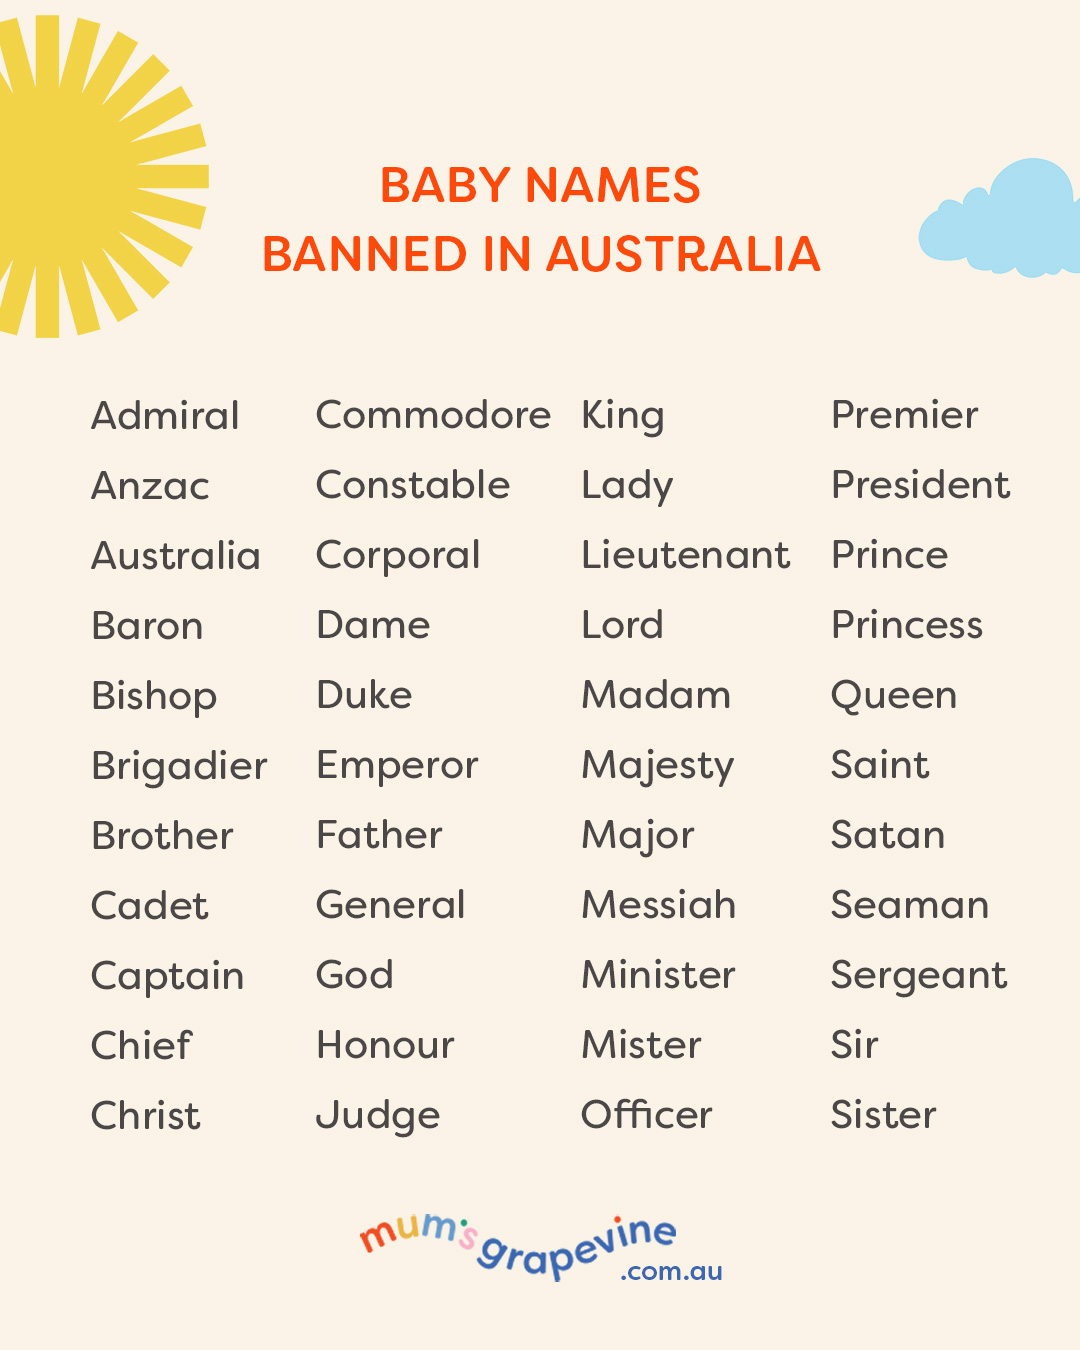 A typed list of banned Baby Names in Australia 